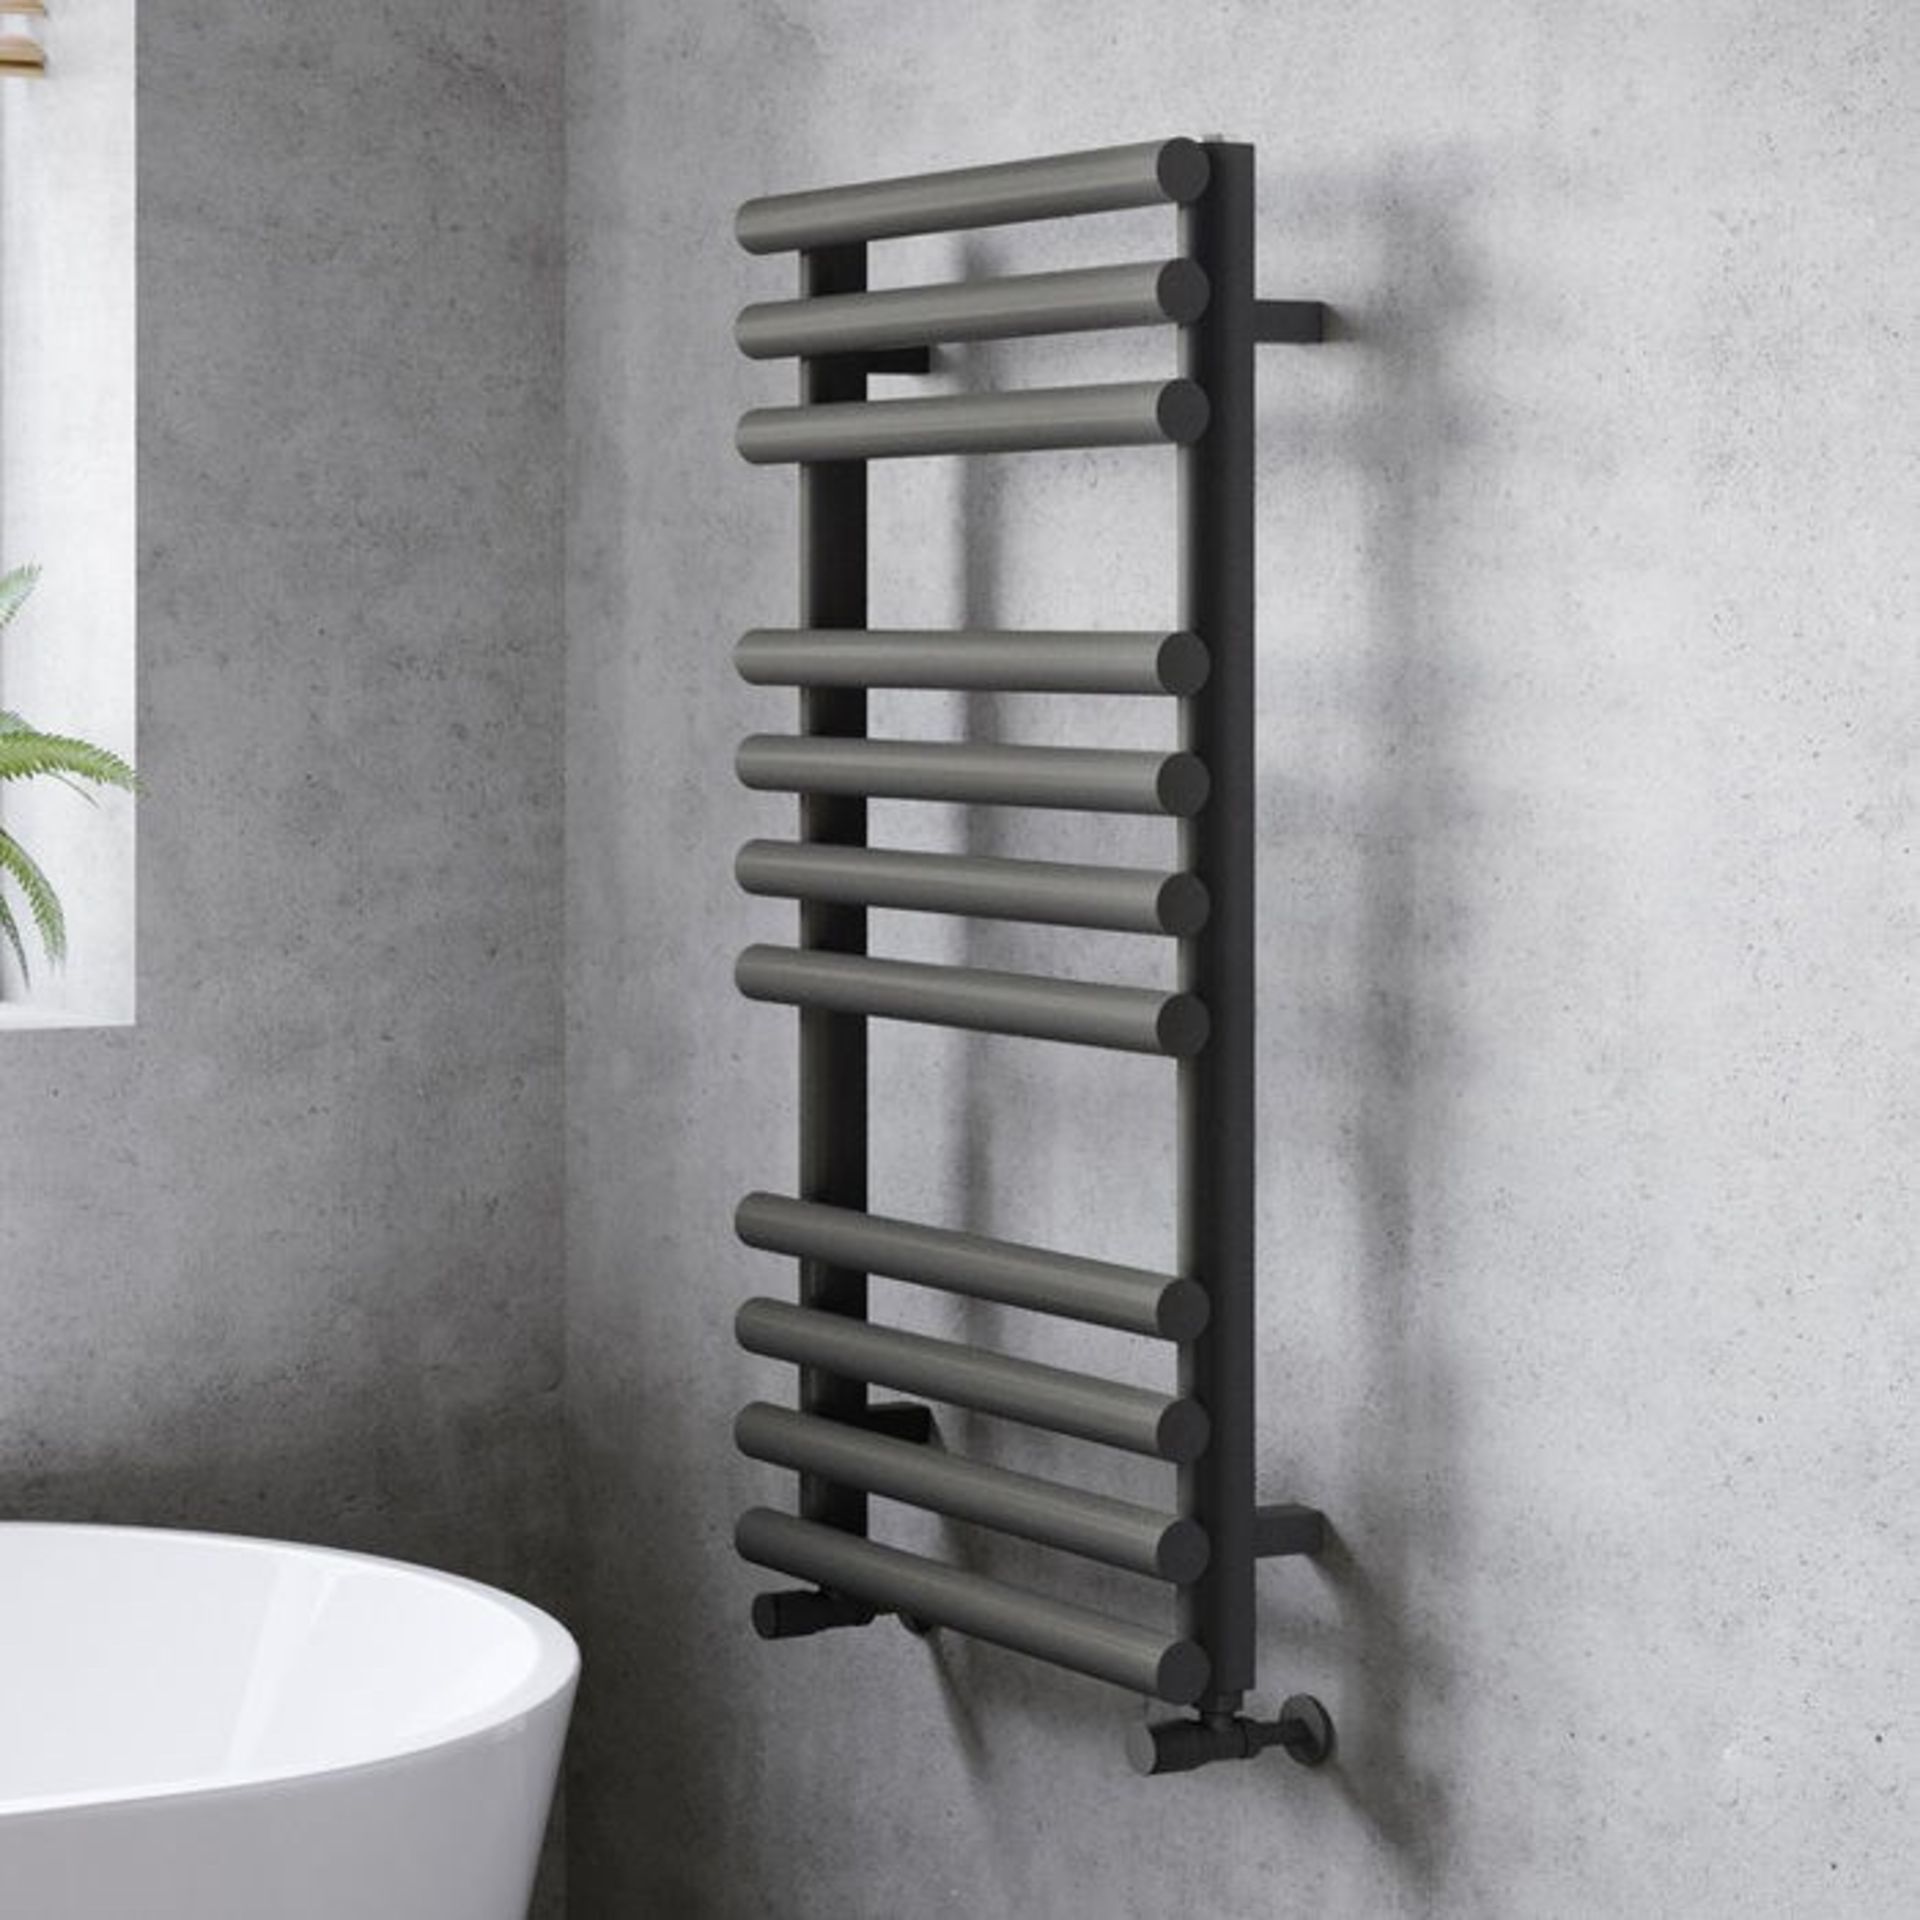 (G16) 900x450mm Anthracite Bar On Bar Towel Rail Radiator. RRP £269.99.Constructed from sturd...